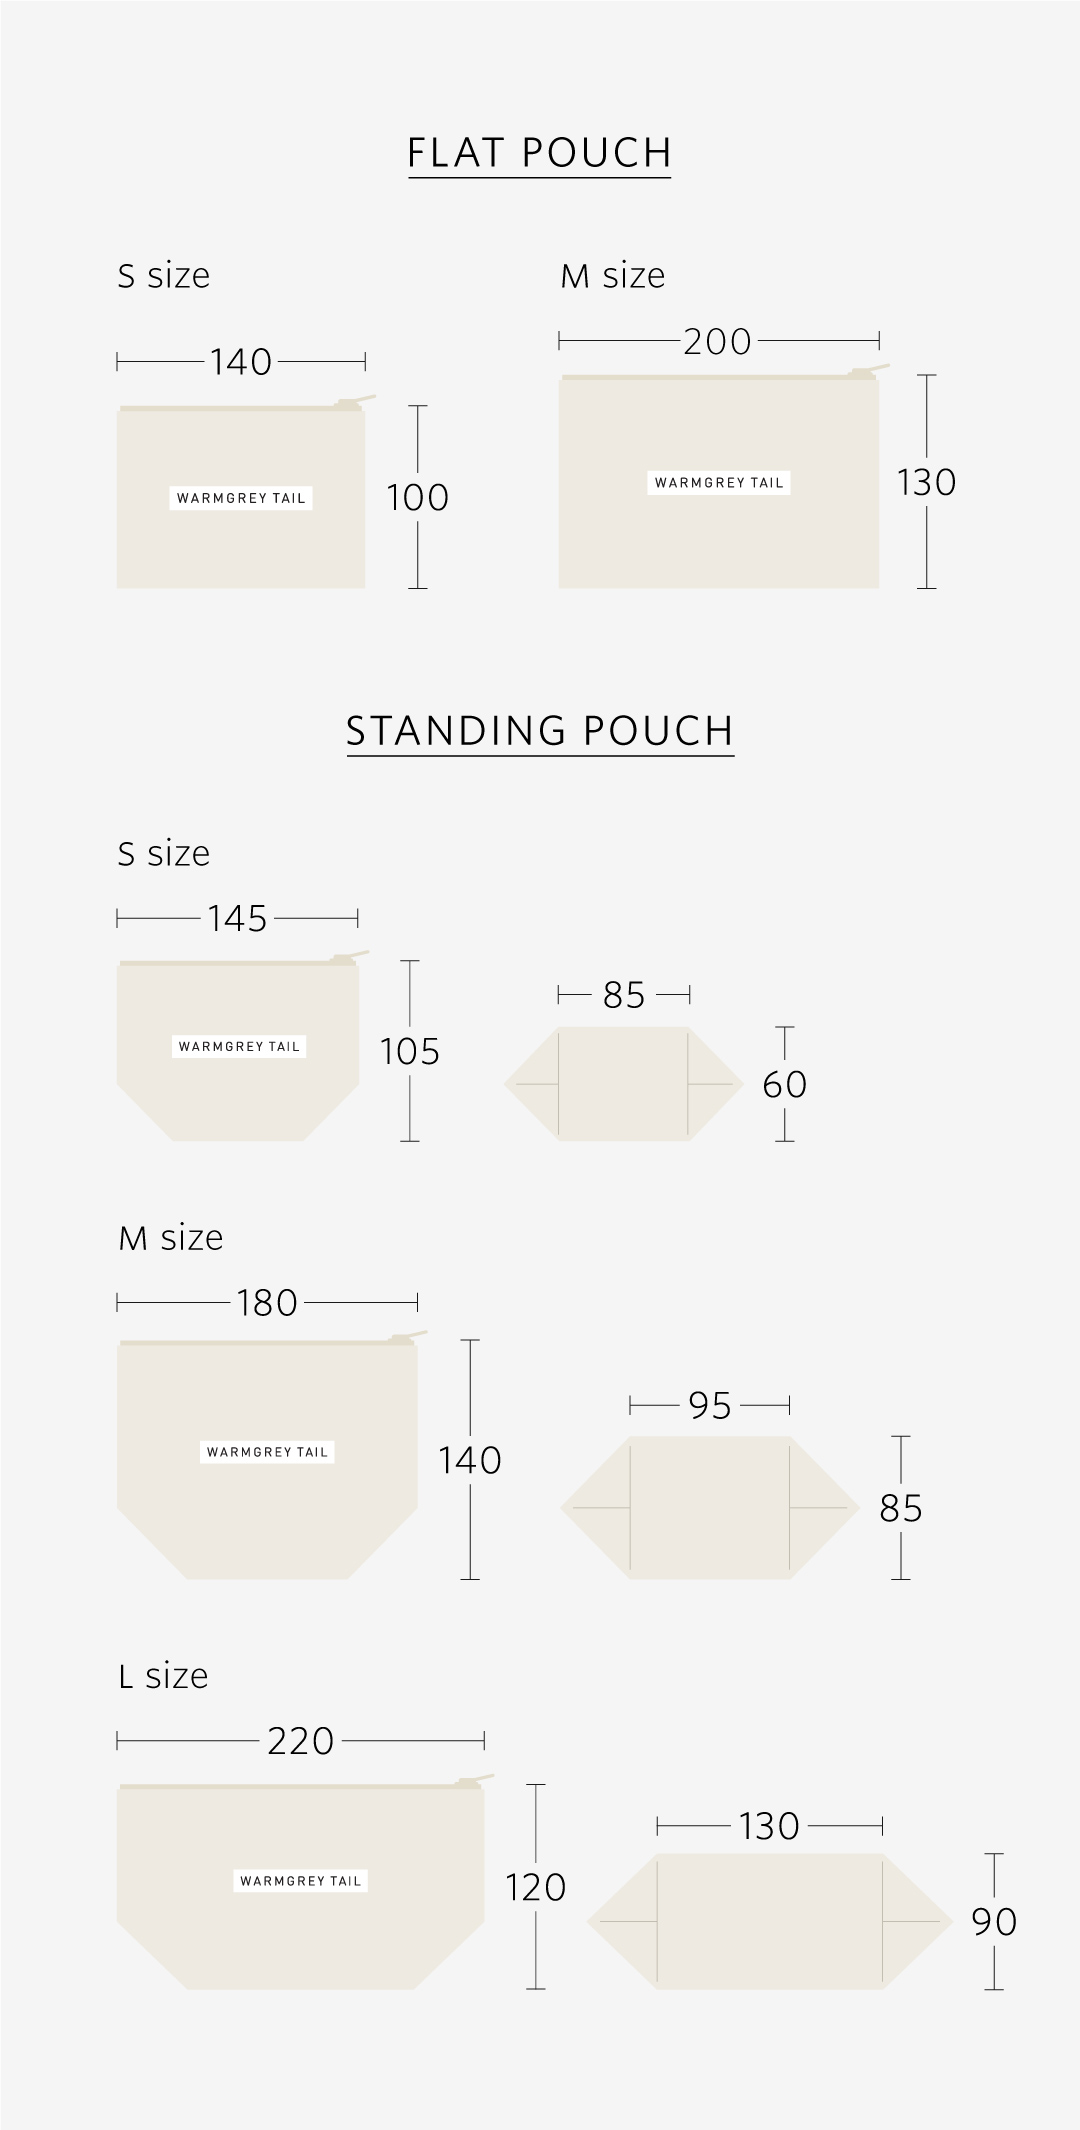 pouch-size-image_133150.jpg